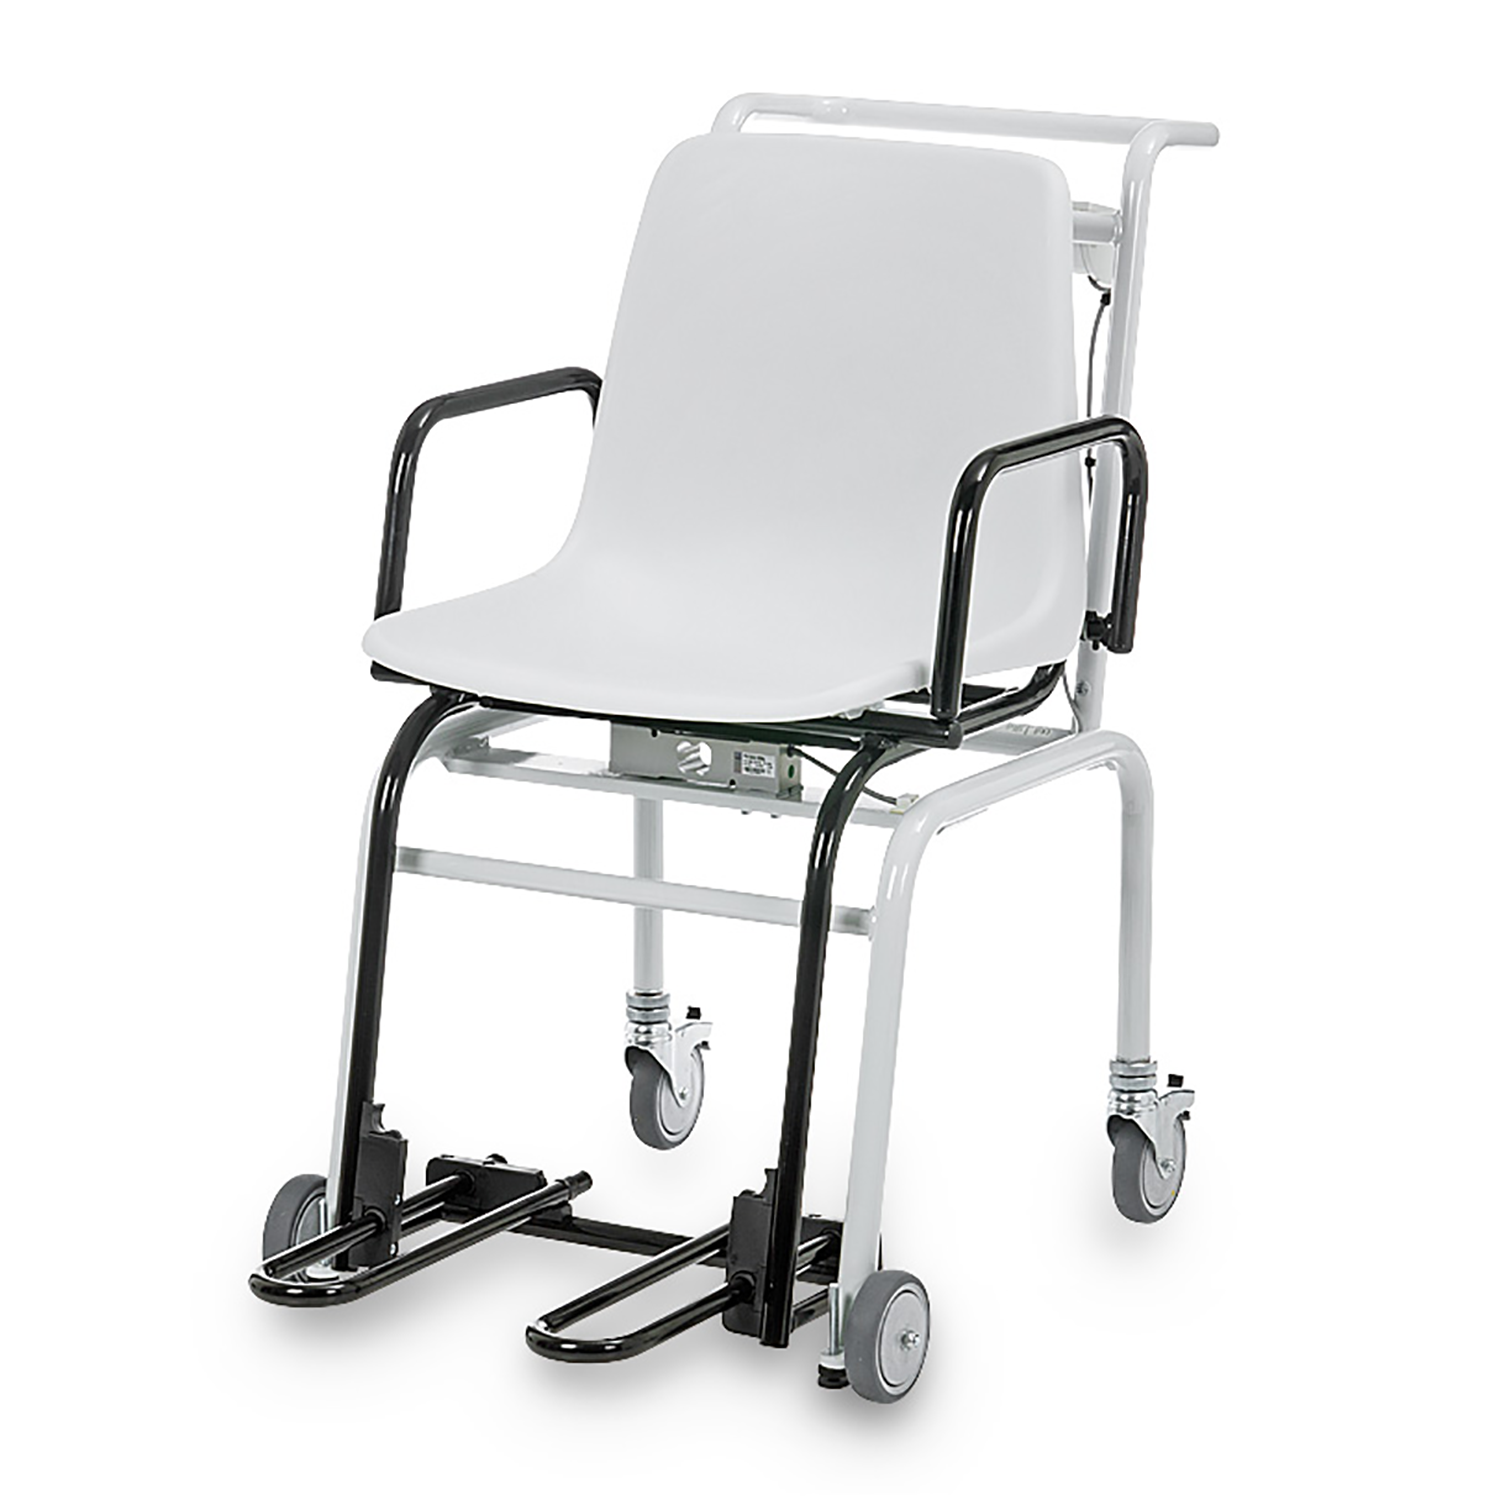 seca 959r Class III Digital High Capacity Chair Scale with fold up arm & footrests, BMI. RS232 interface